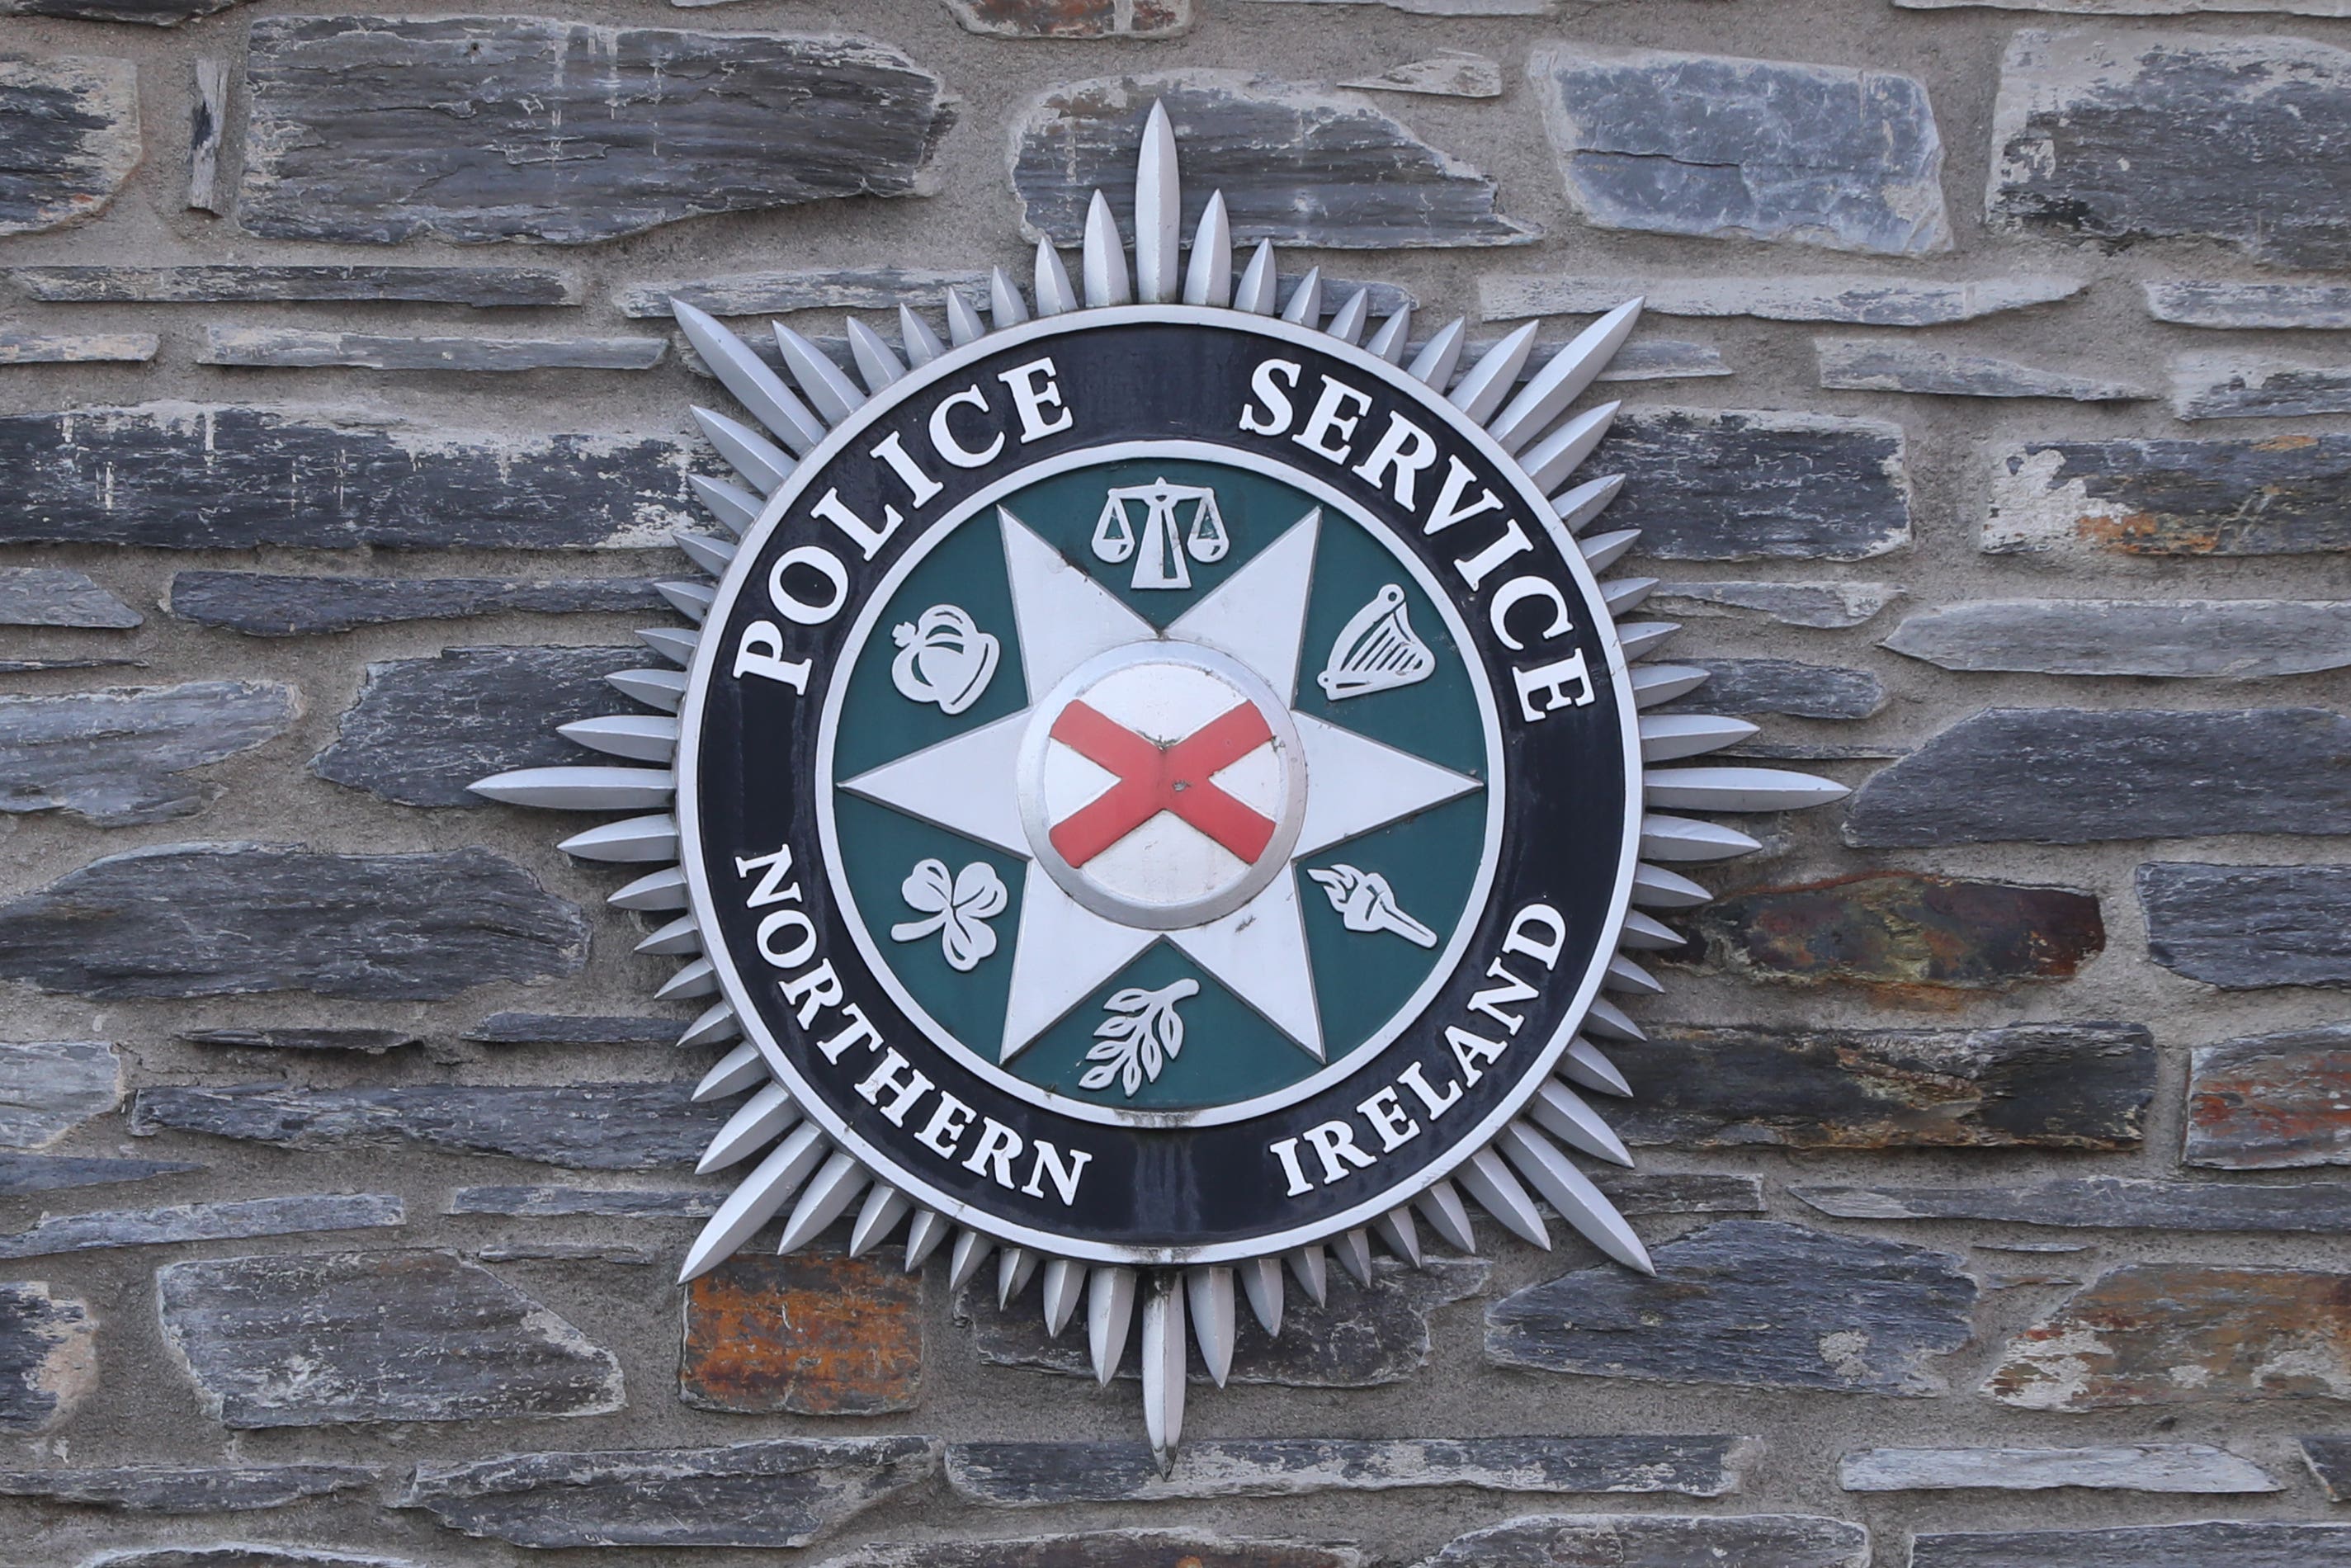 A 39-year-old man has been arrested after a search in Lurgan